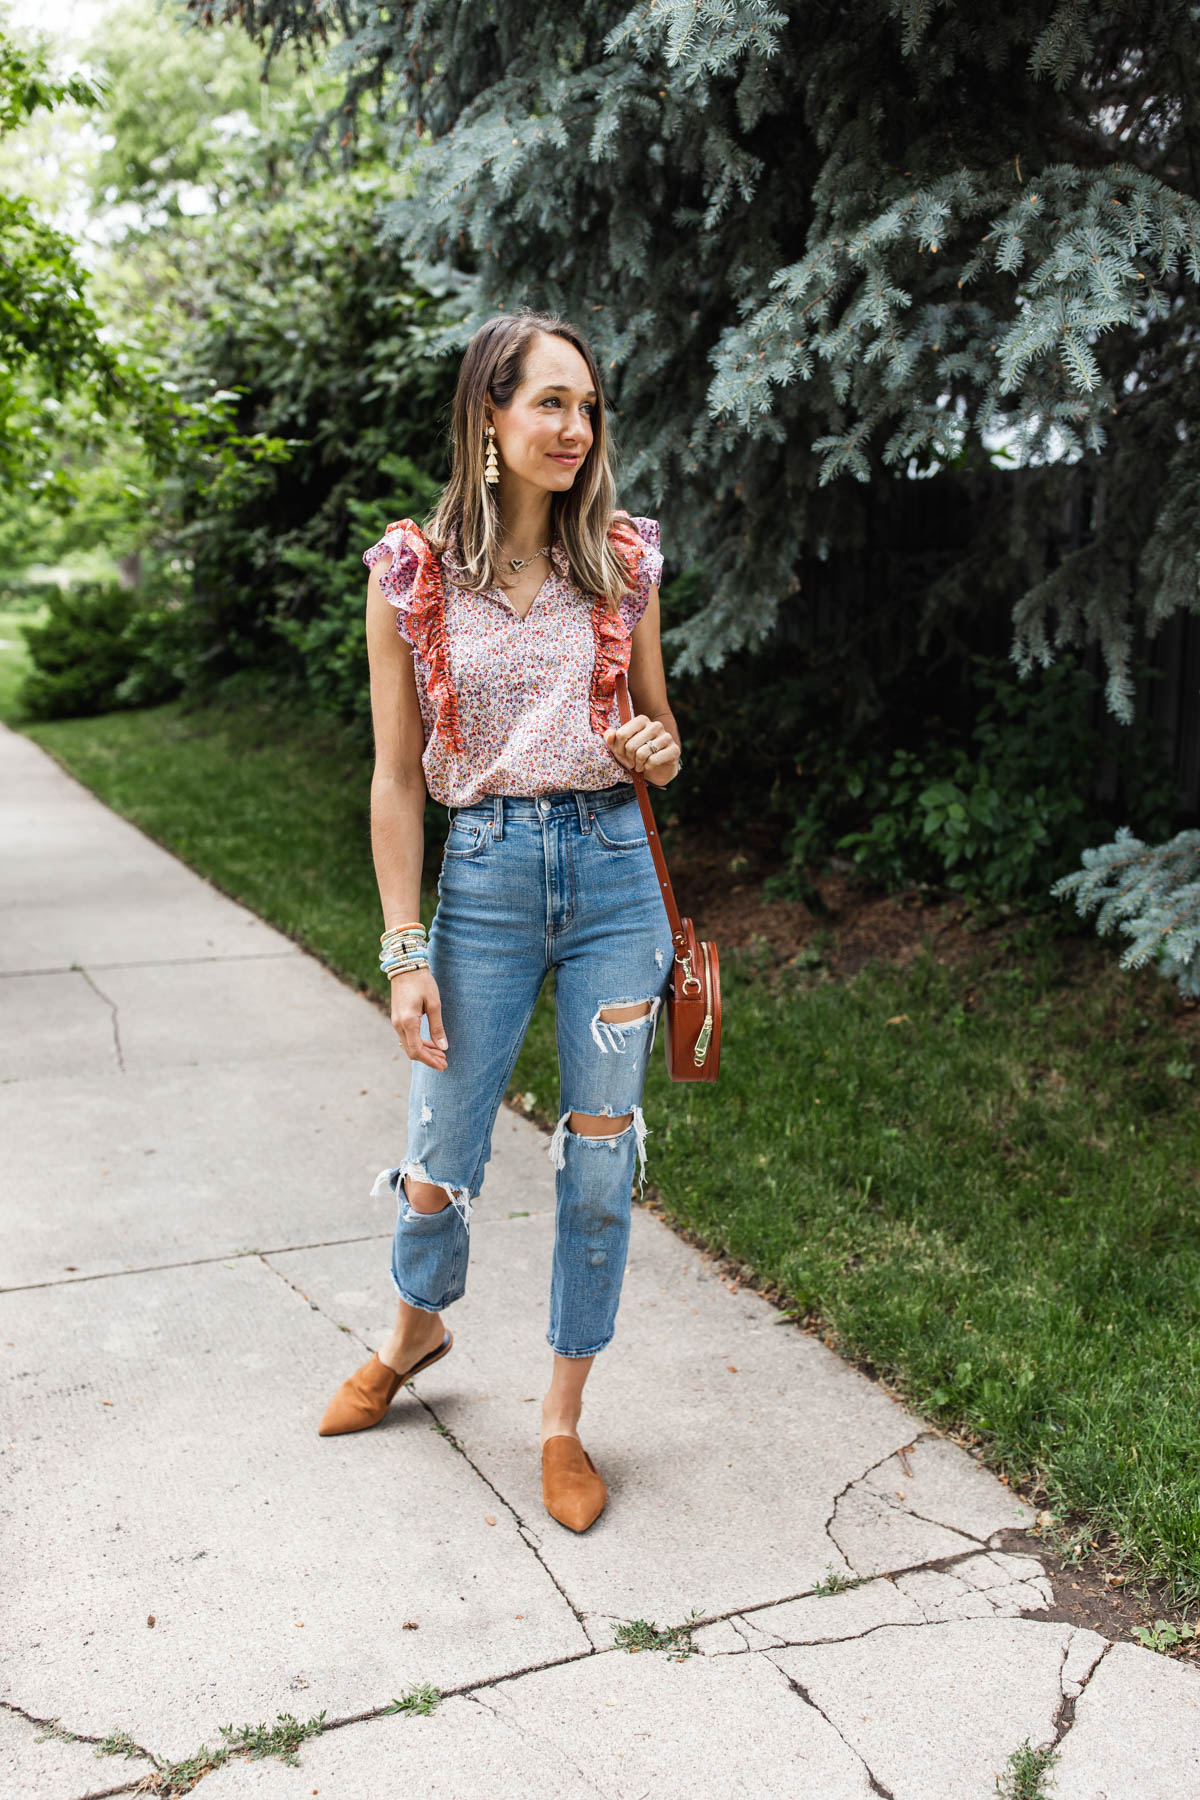 ruffled top and jeans outfit